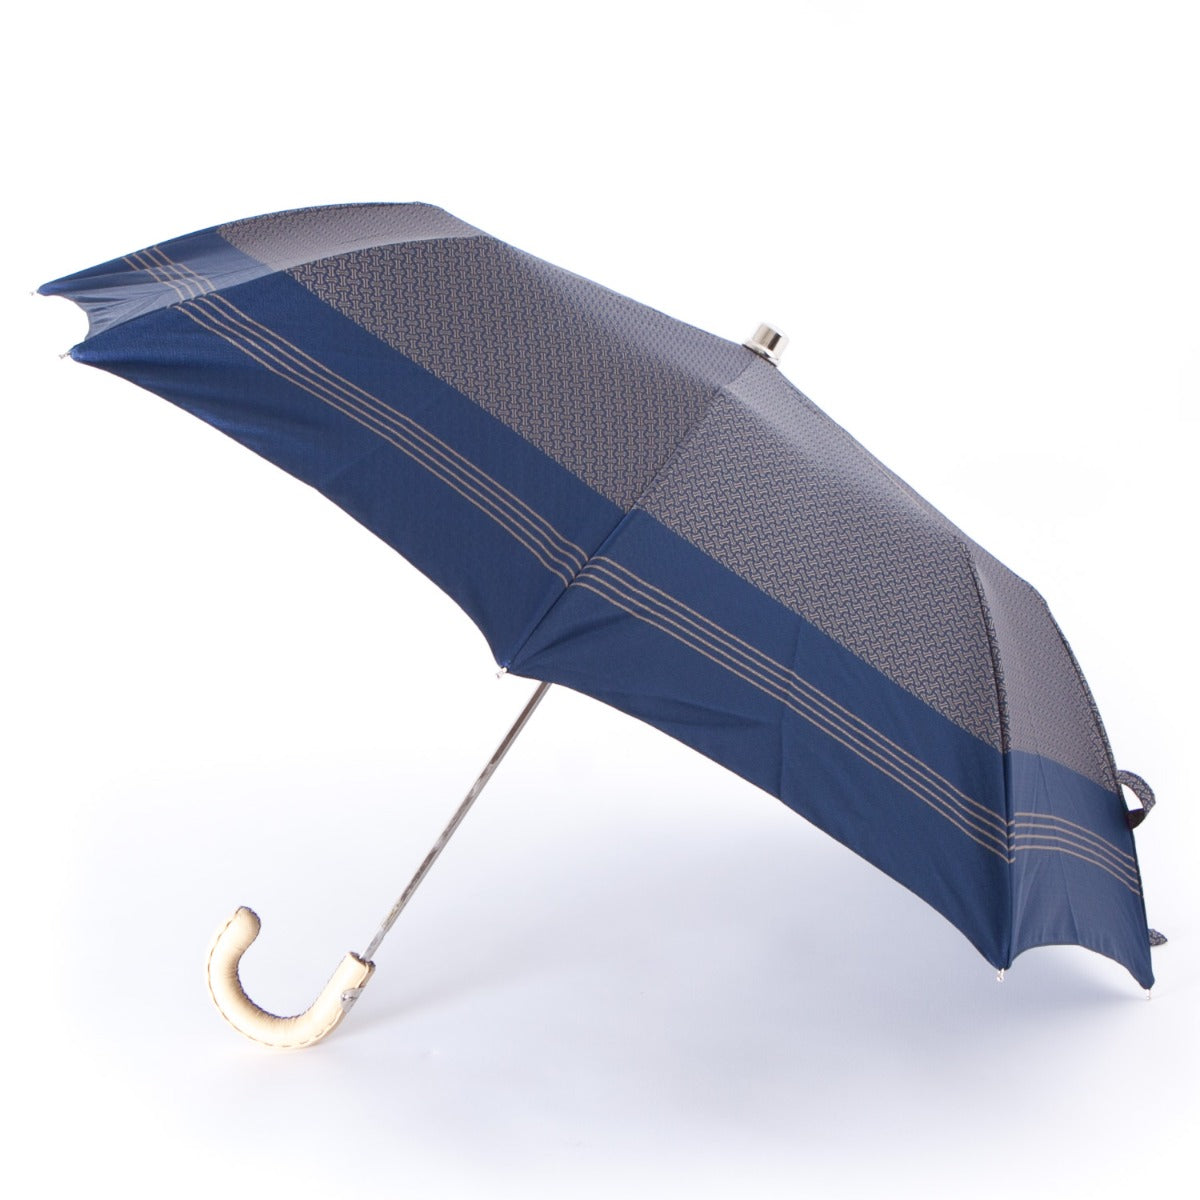 A Patterned Navy Travel Umbrella with Leather Handle by KirbyAllison.com, perfect for traveling in Milan, Italy.